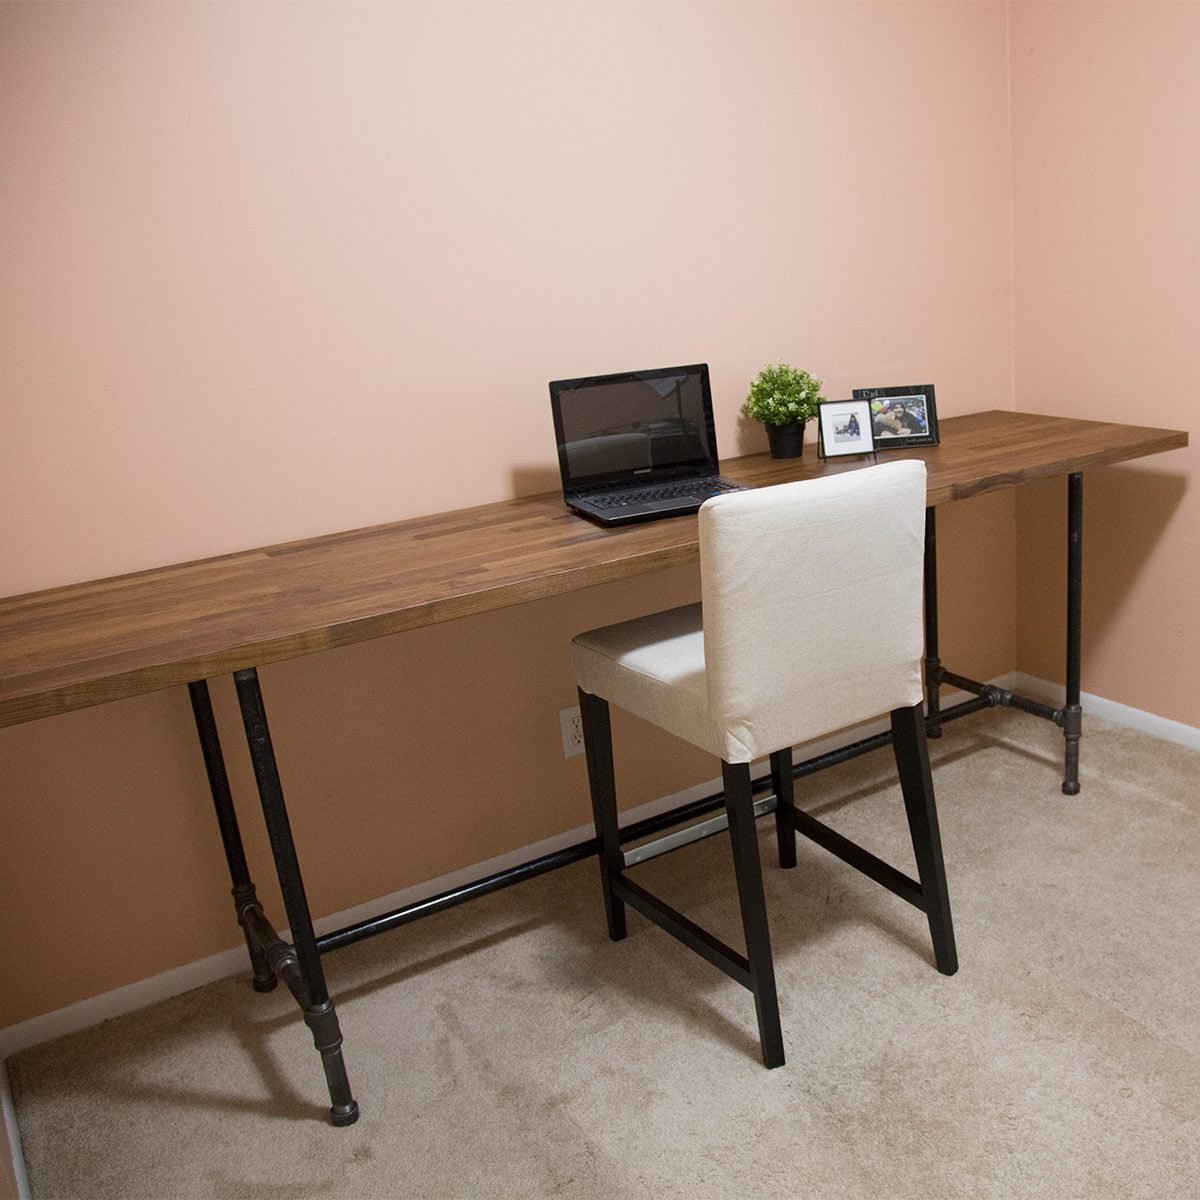 How To Build A Pipe Desk The Family Handyman